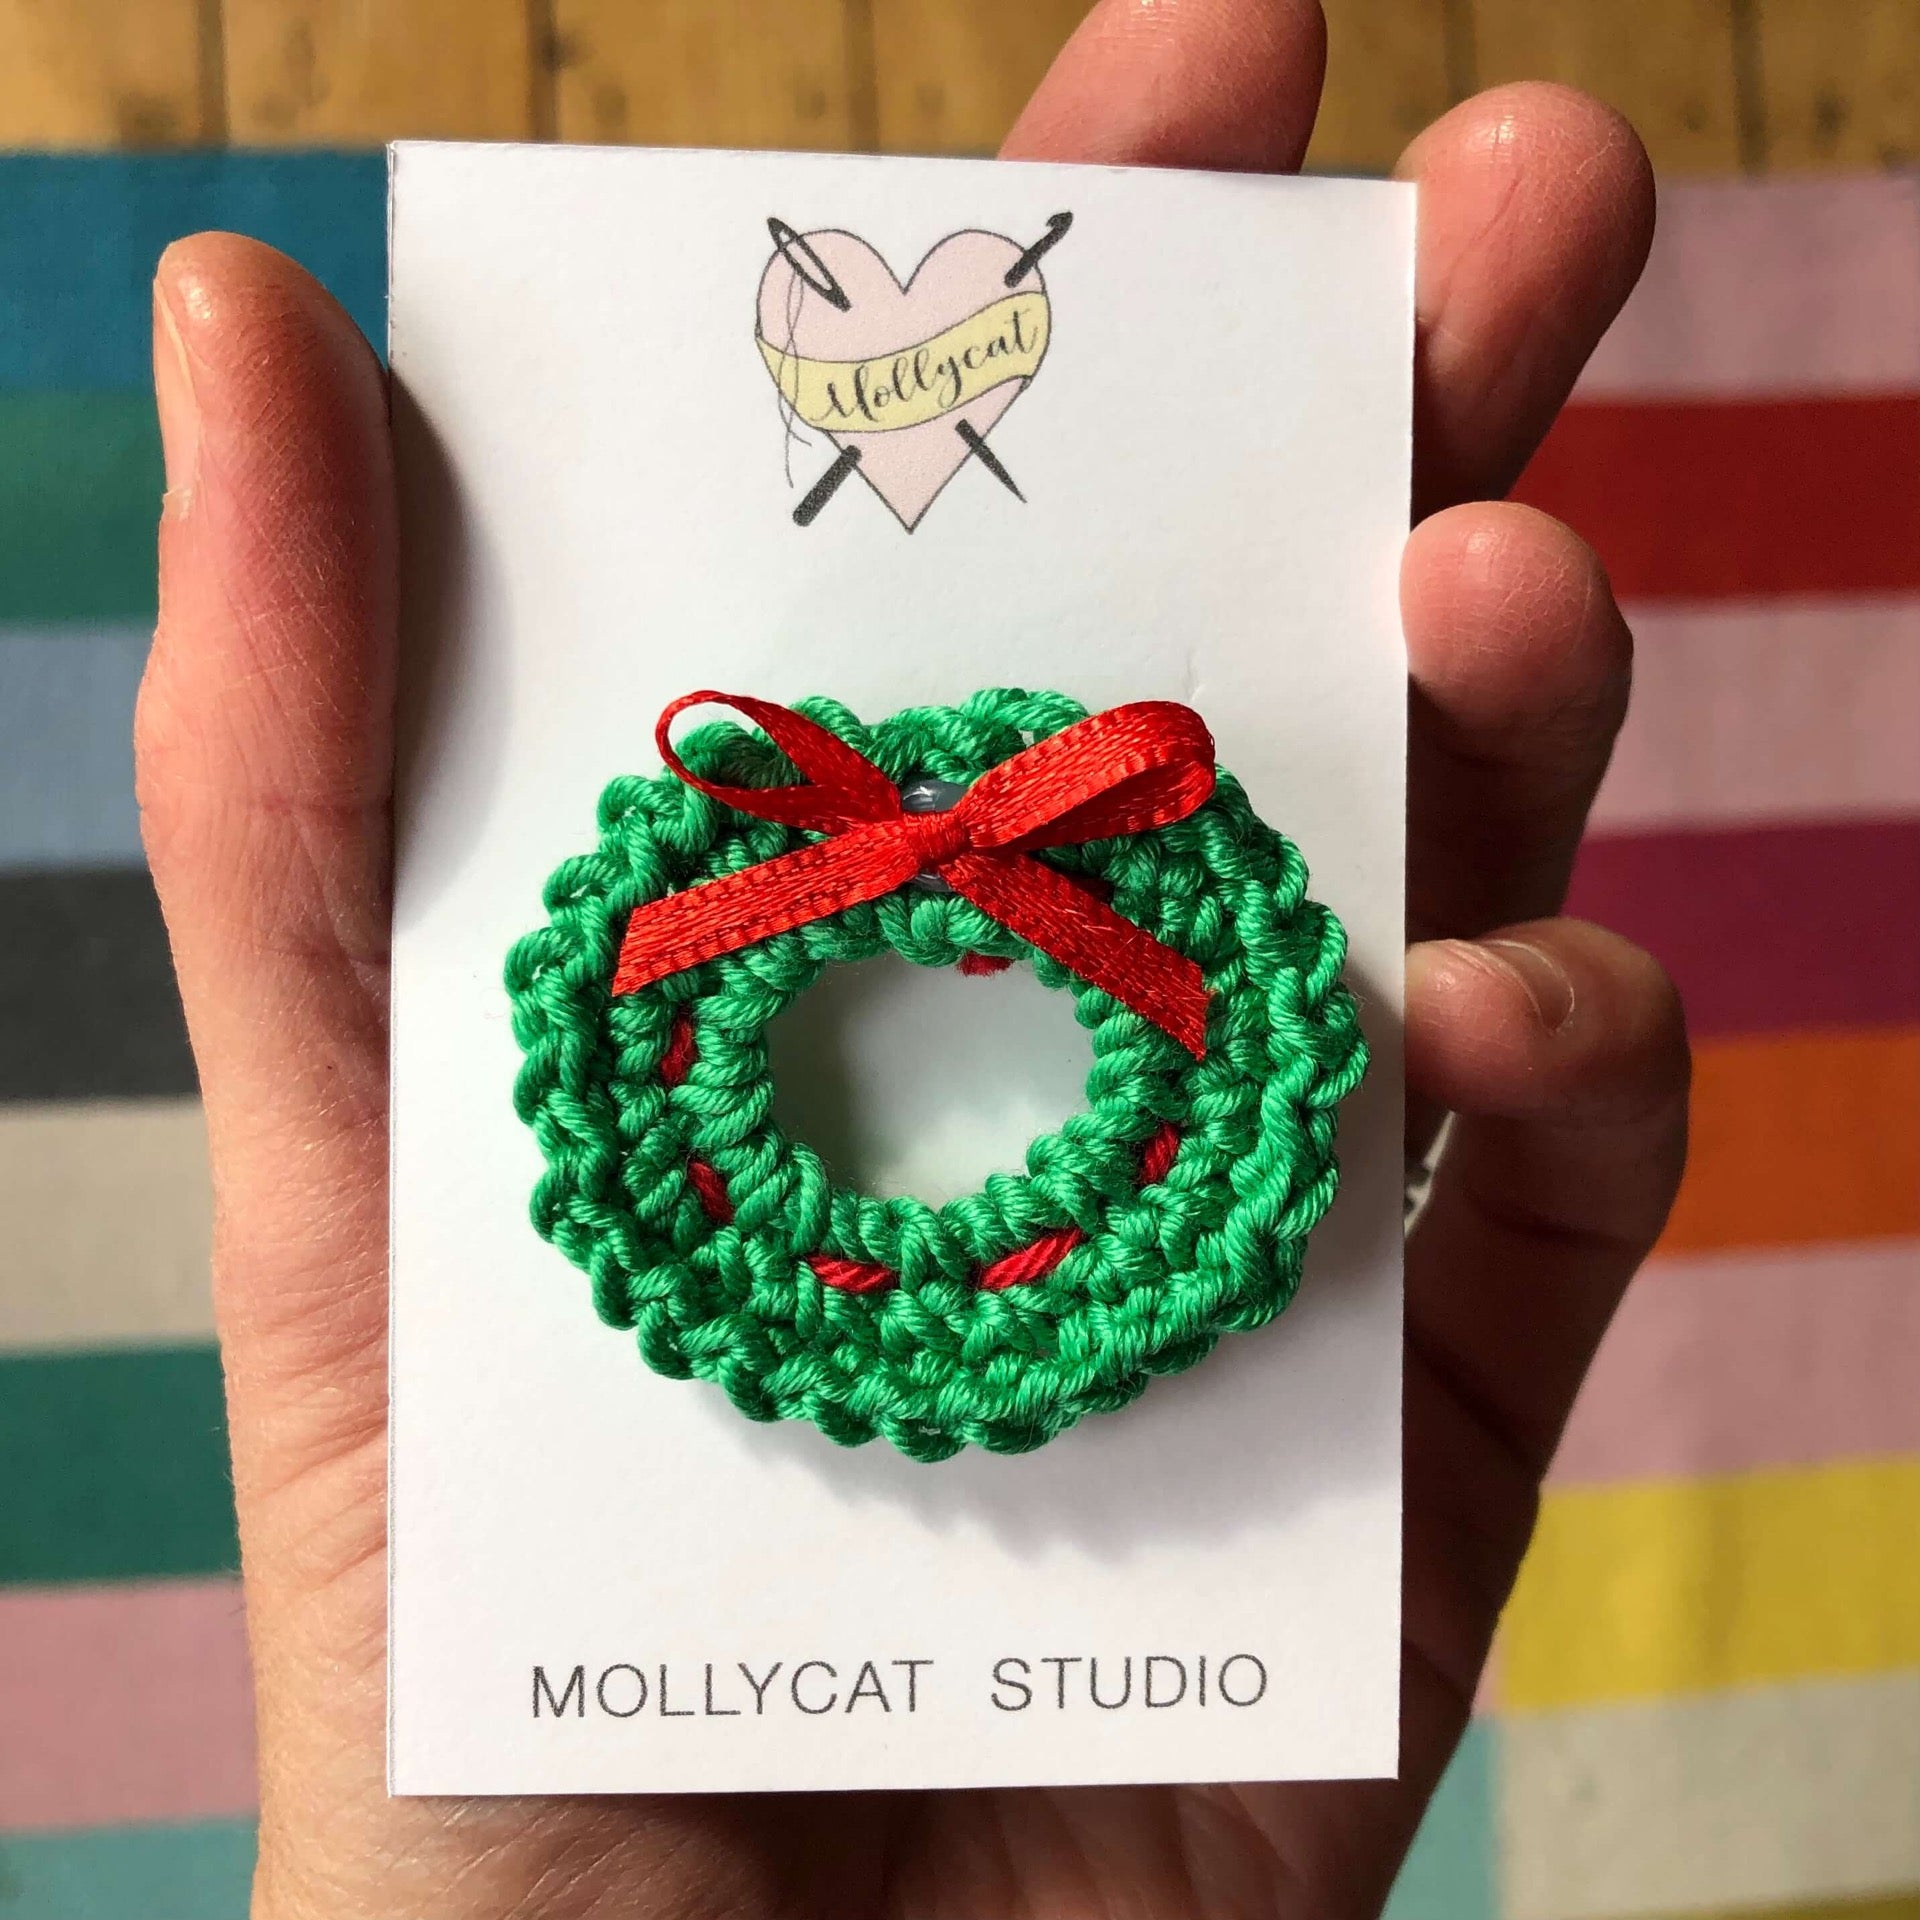 A crochet green and red Christmas wreath , Made by Jules Cooke, Mollycat Studio - a small business based in Liverpool UK